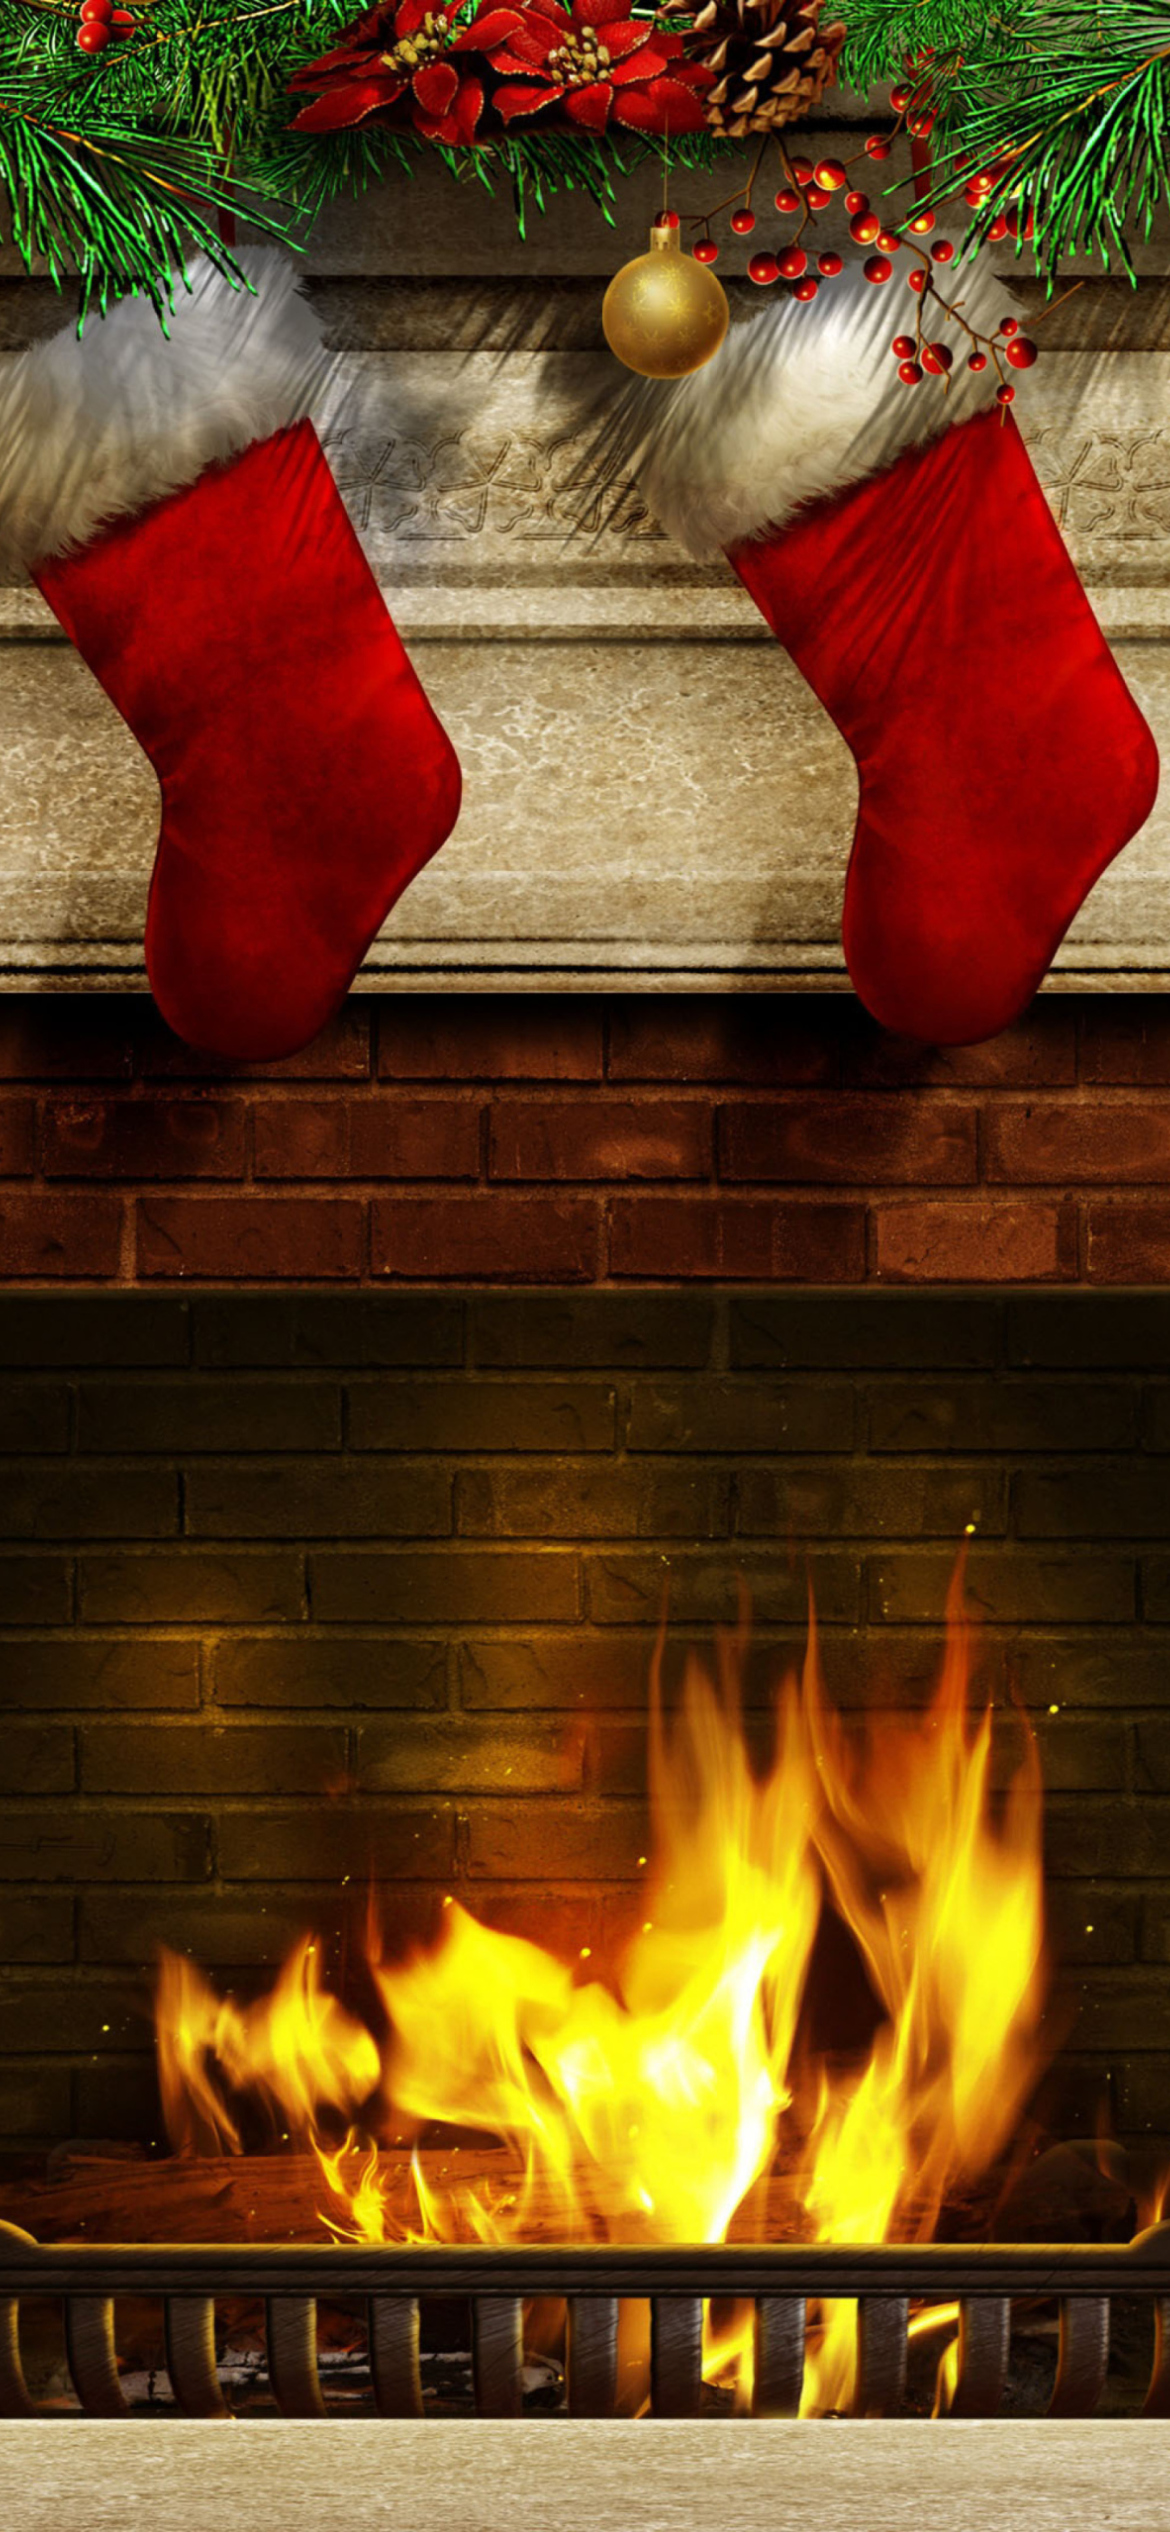 Fireplace And Christmas Socks Wallpaper for iPhone 11 Pro